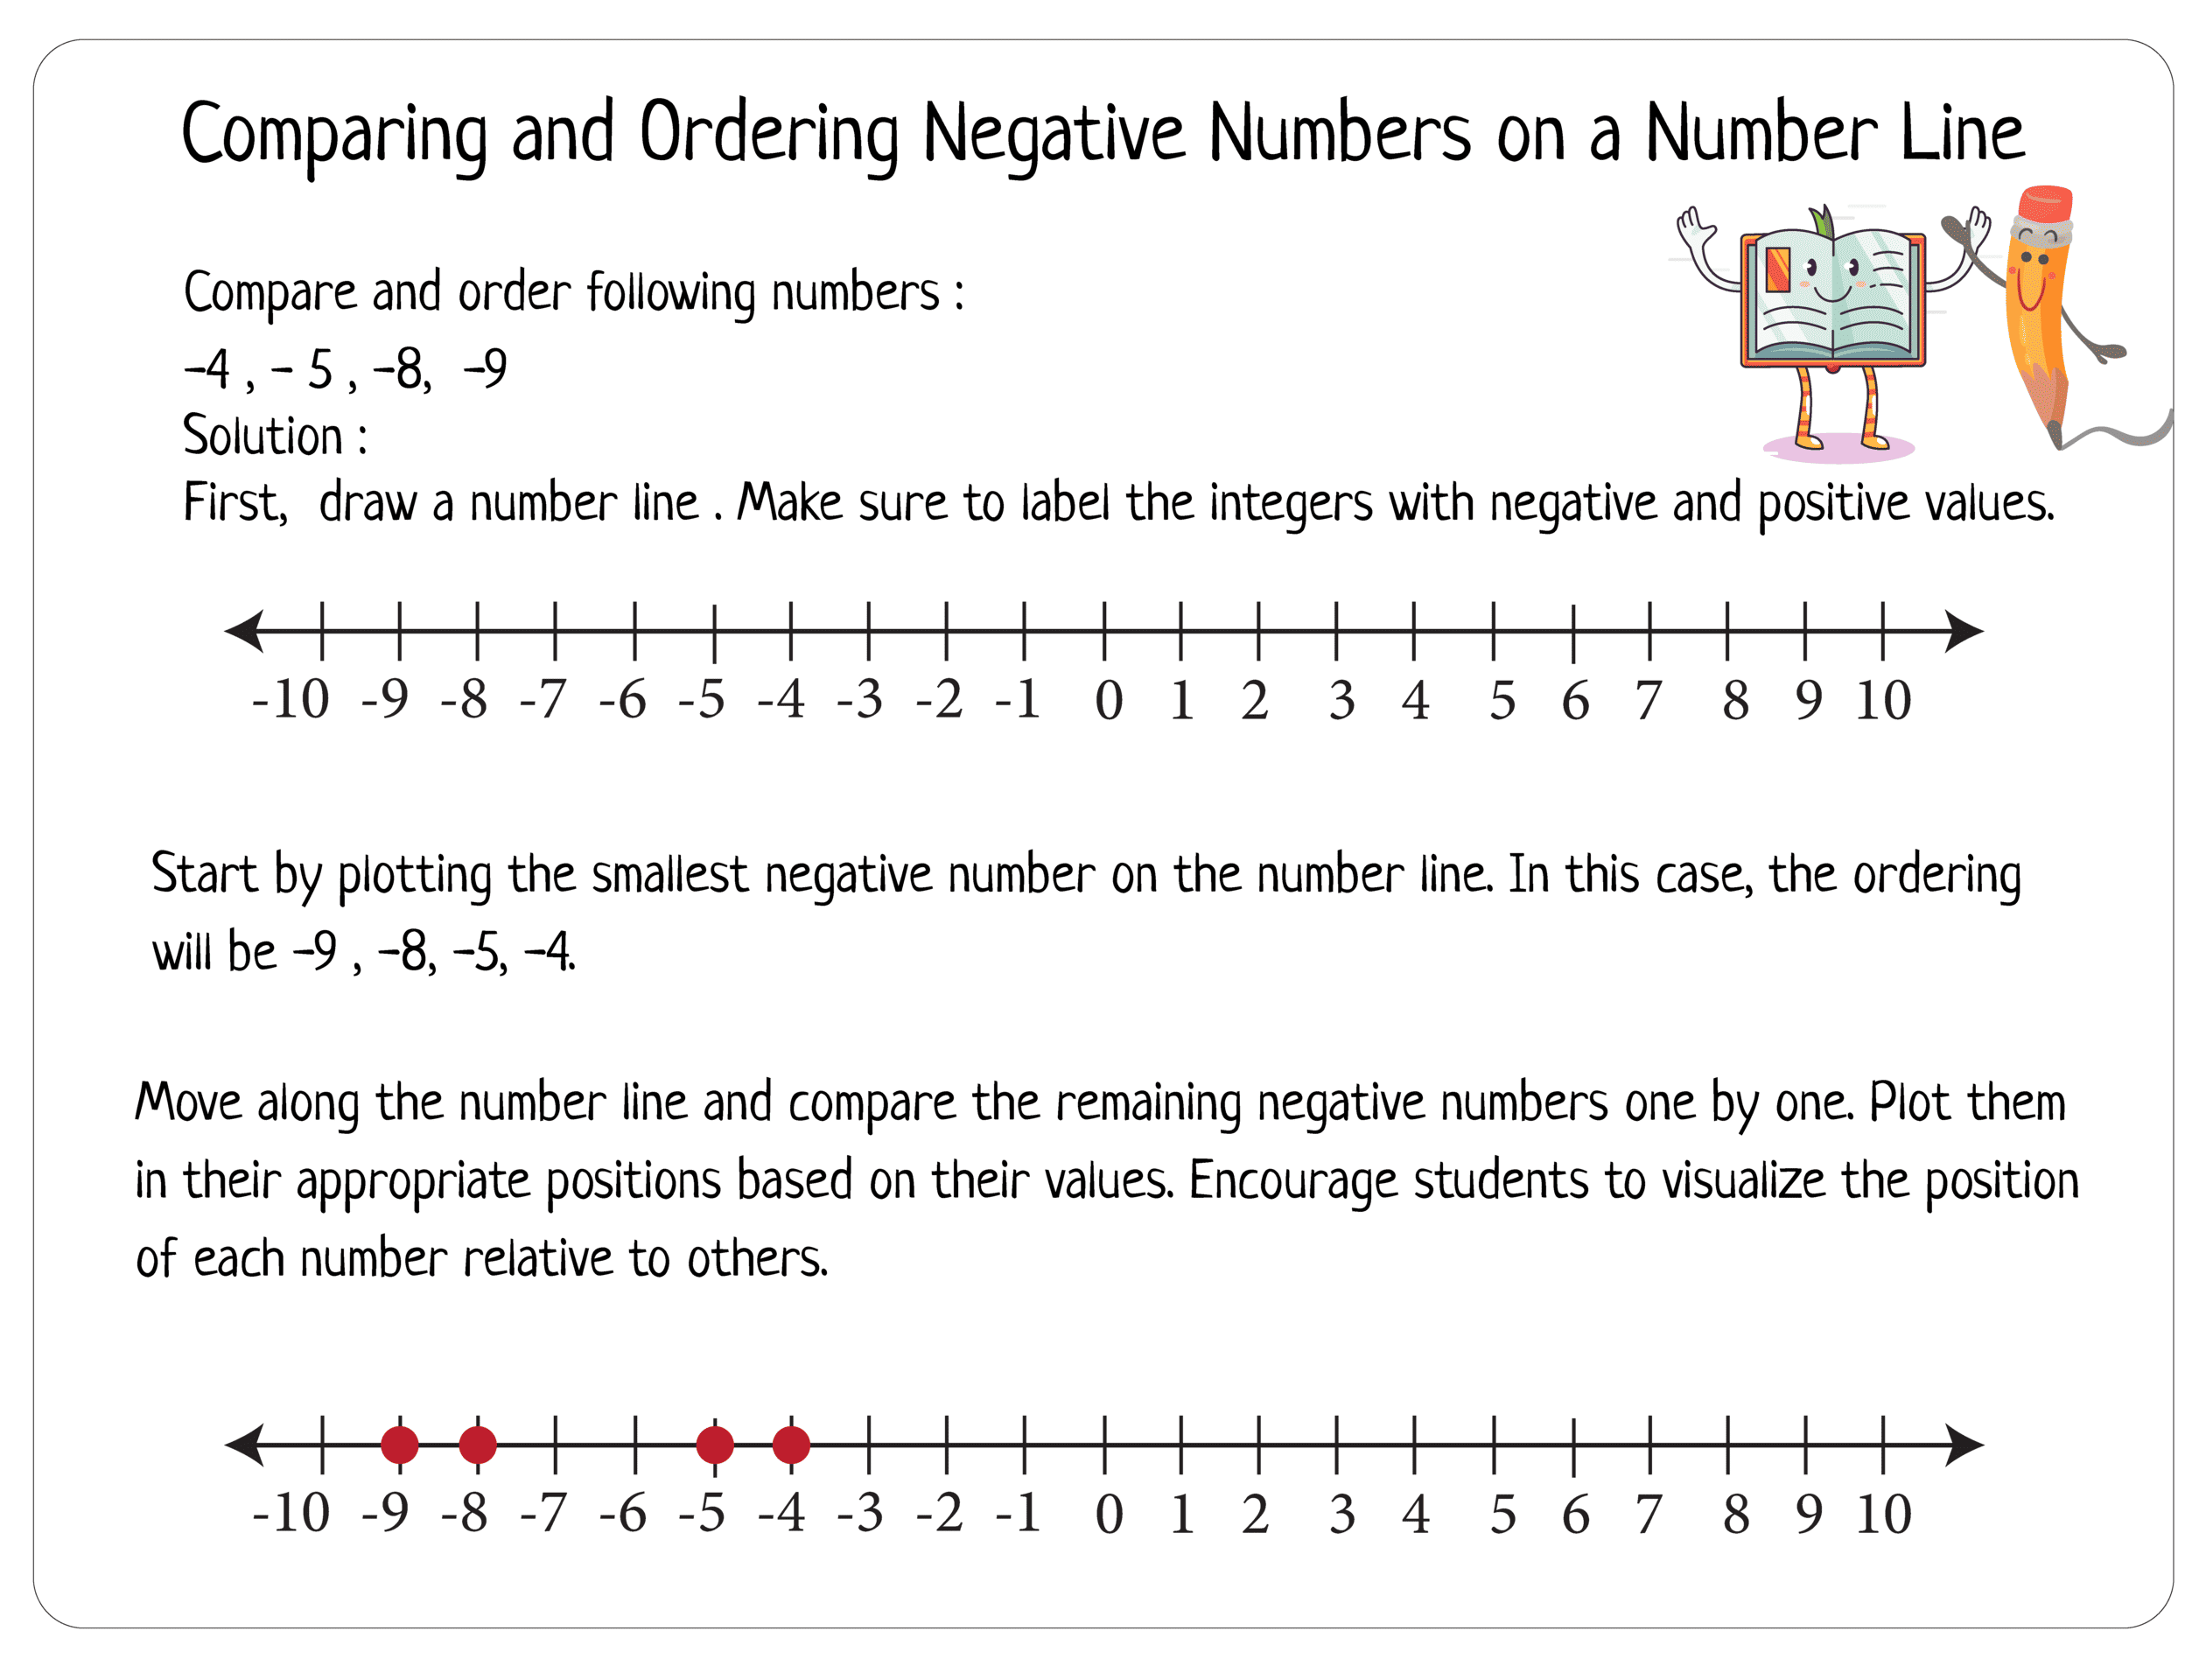 Steps of plotting negative numbers on a number line (2)